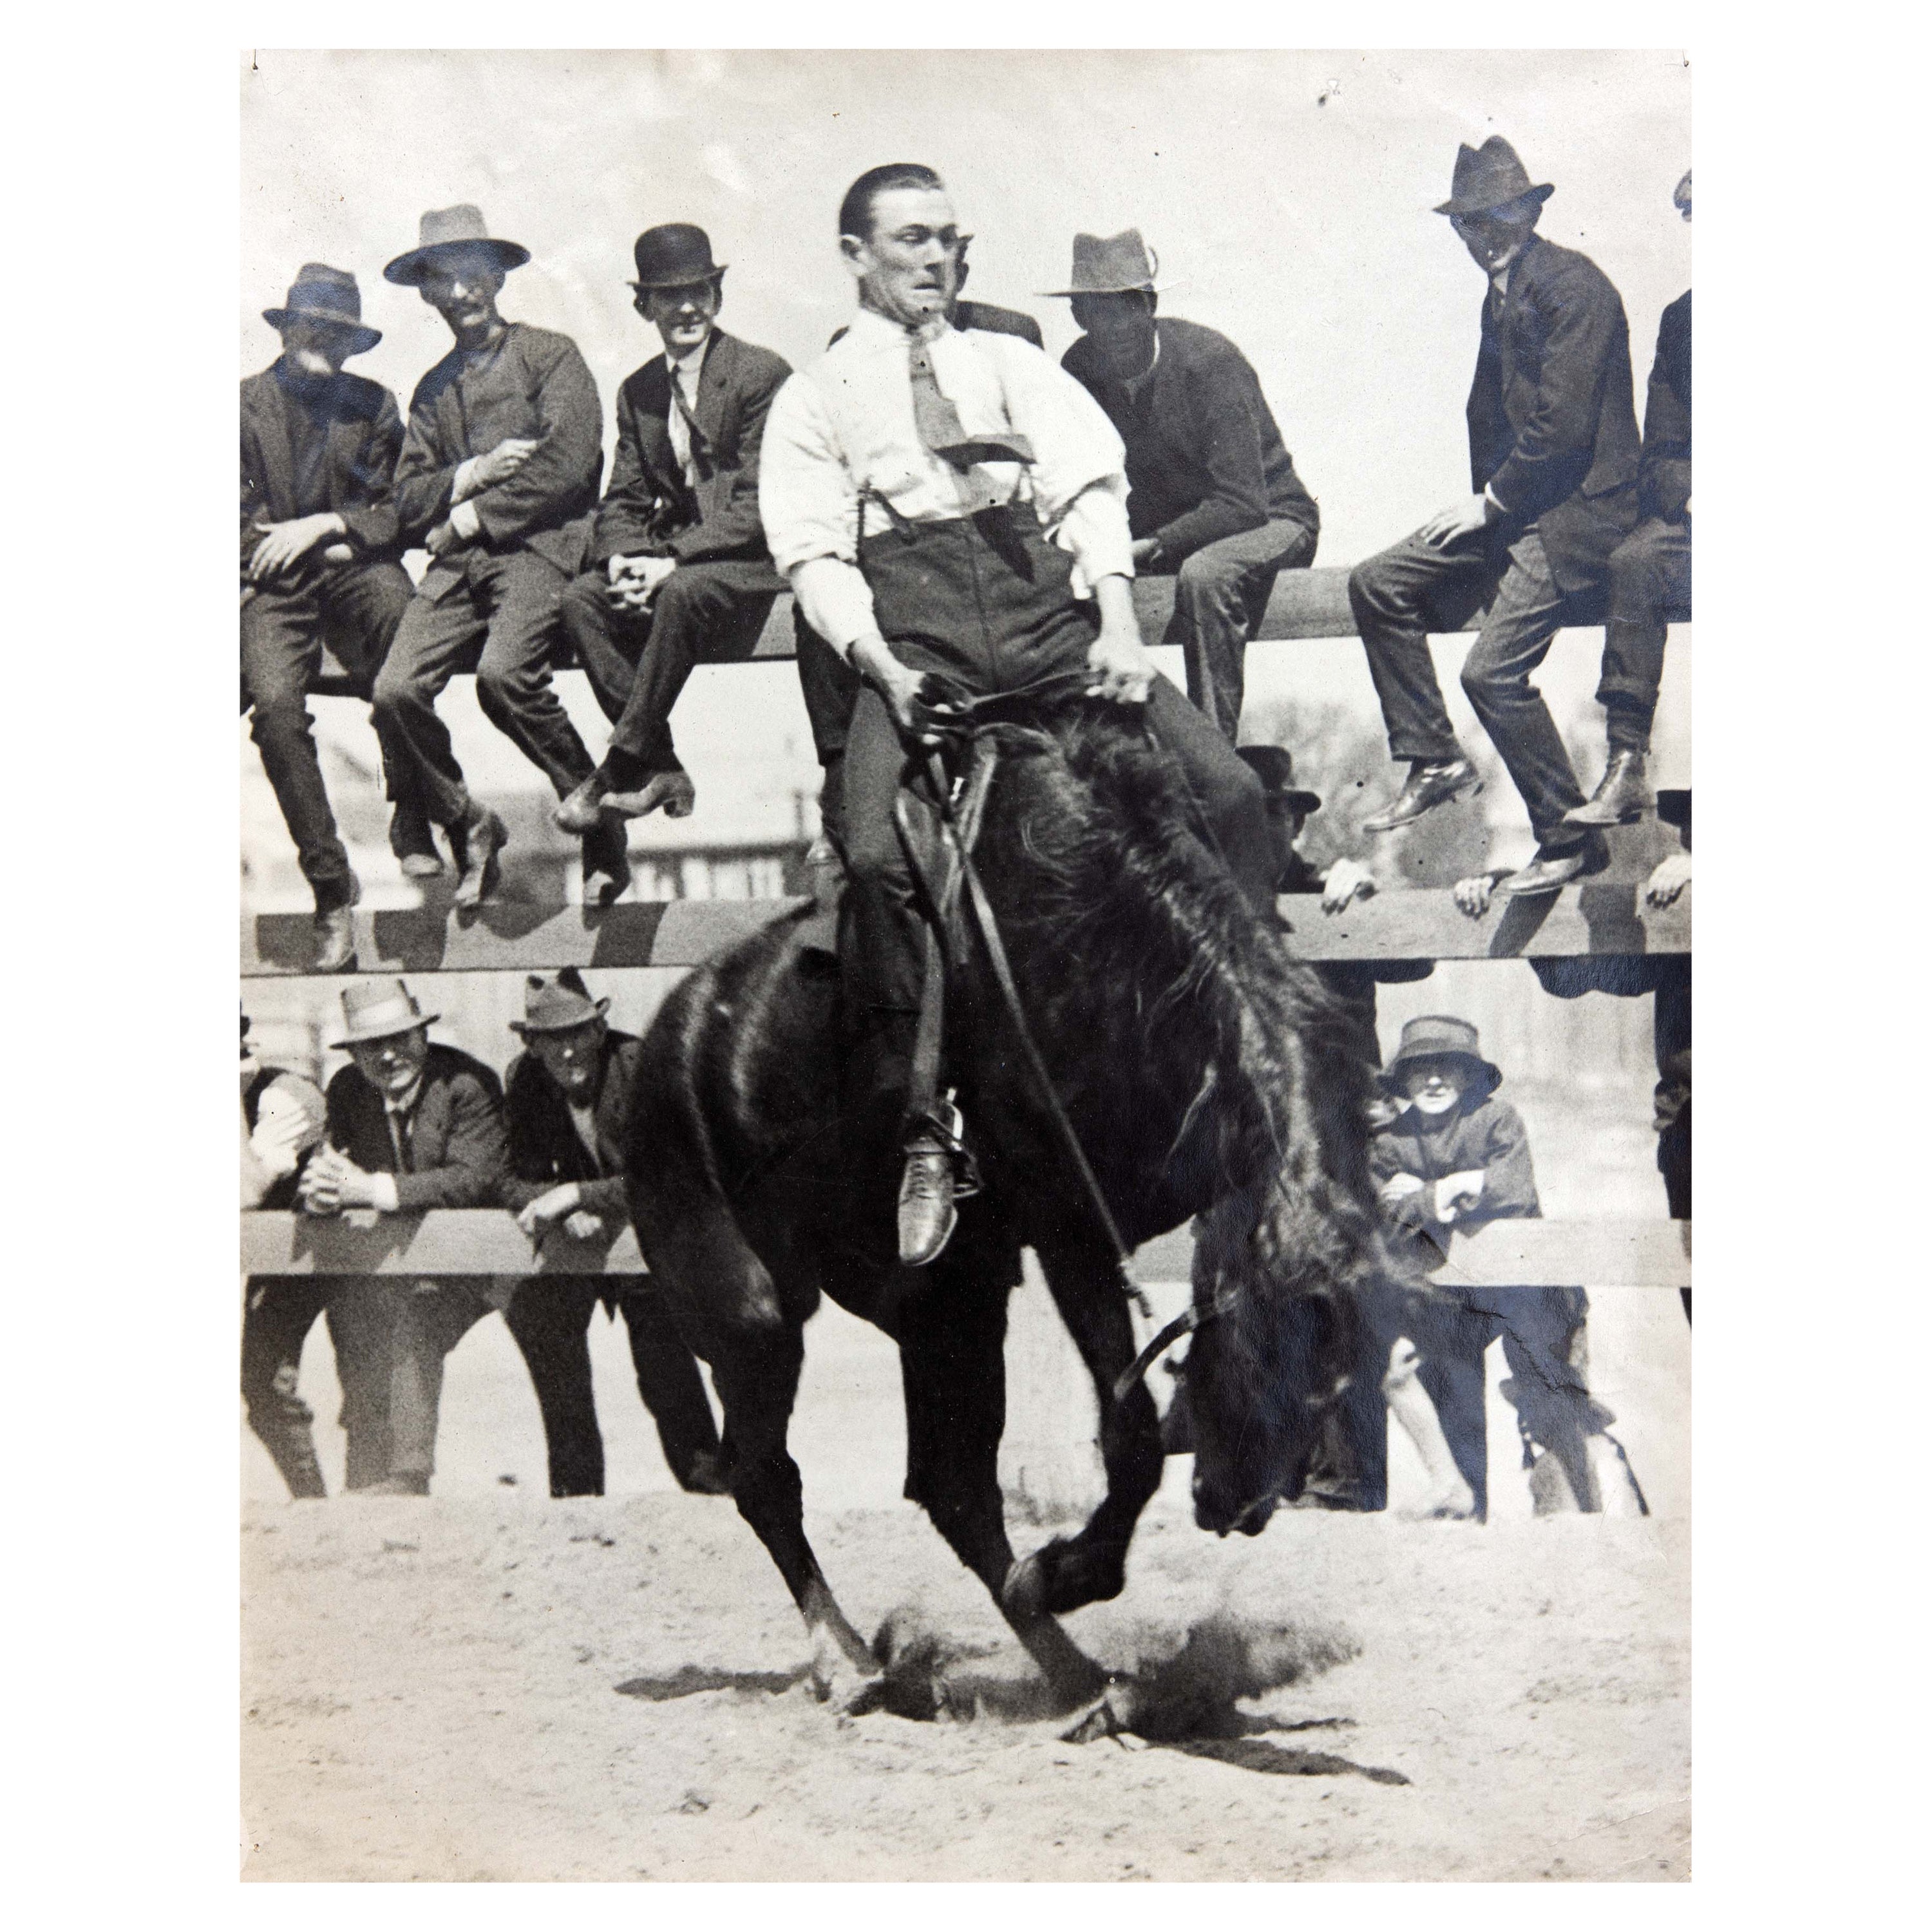 Vintage Bucking Bronco Rodeo Photograph, Early 20th Century